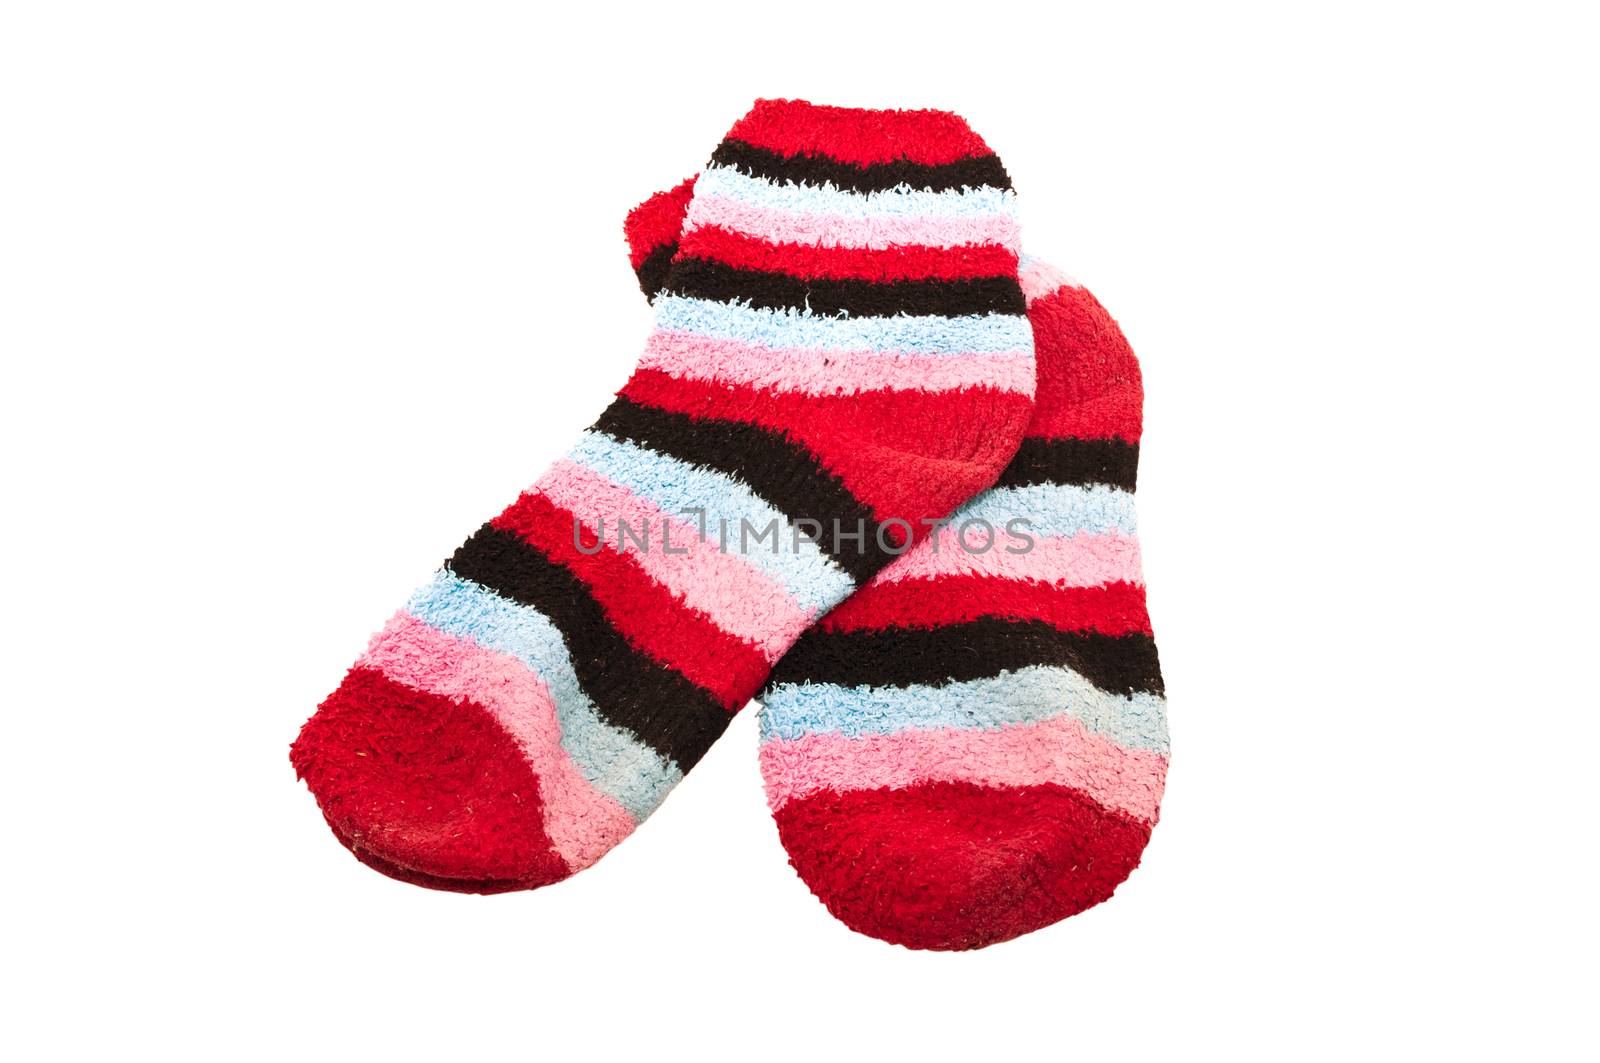 two colorful socks isolated on white background